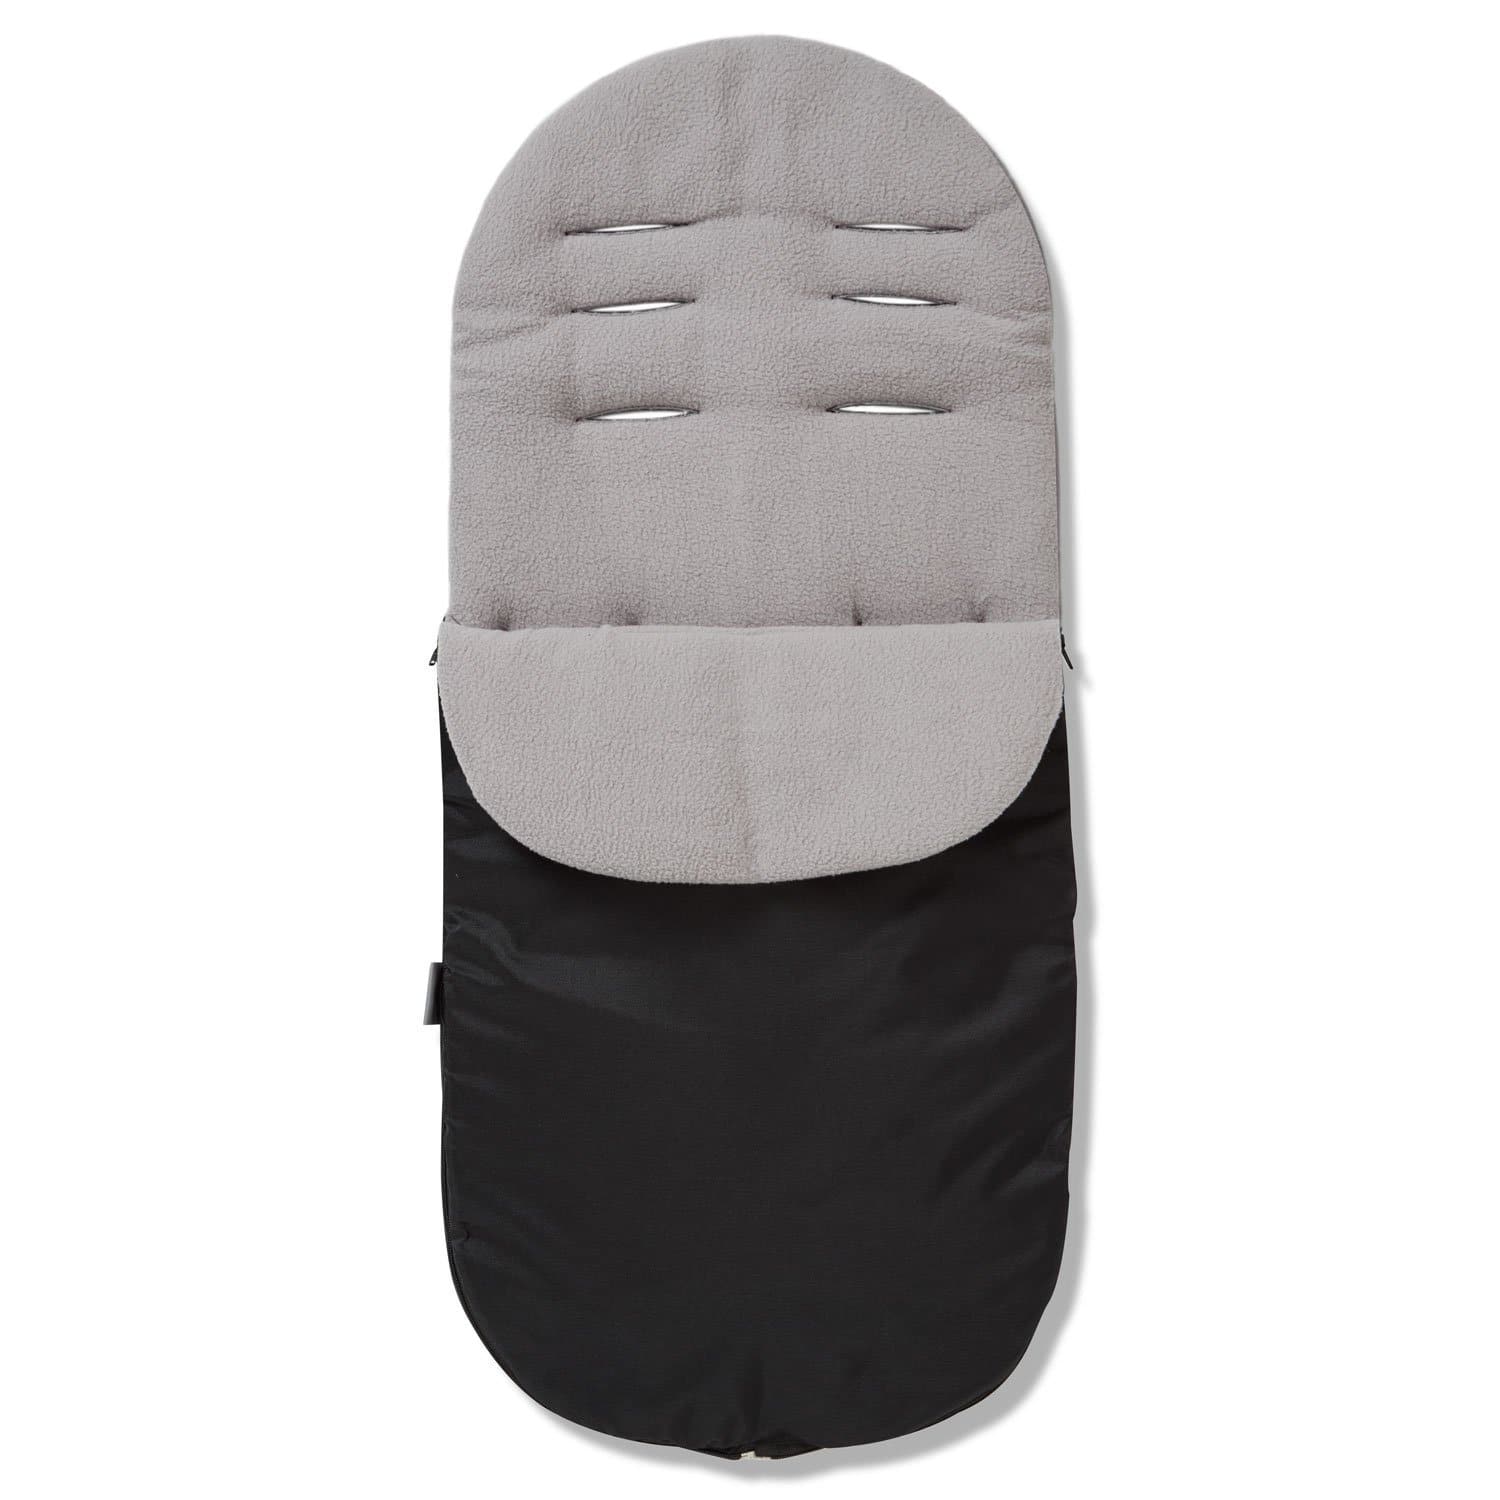 Footmuff / Cosy Toes Compatible with Mamas & Papas - Grey / Fits All Models | For Your Little One